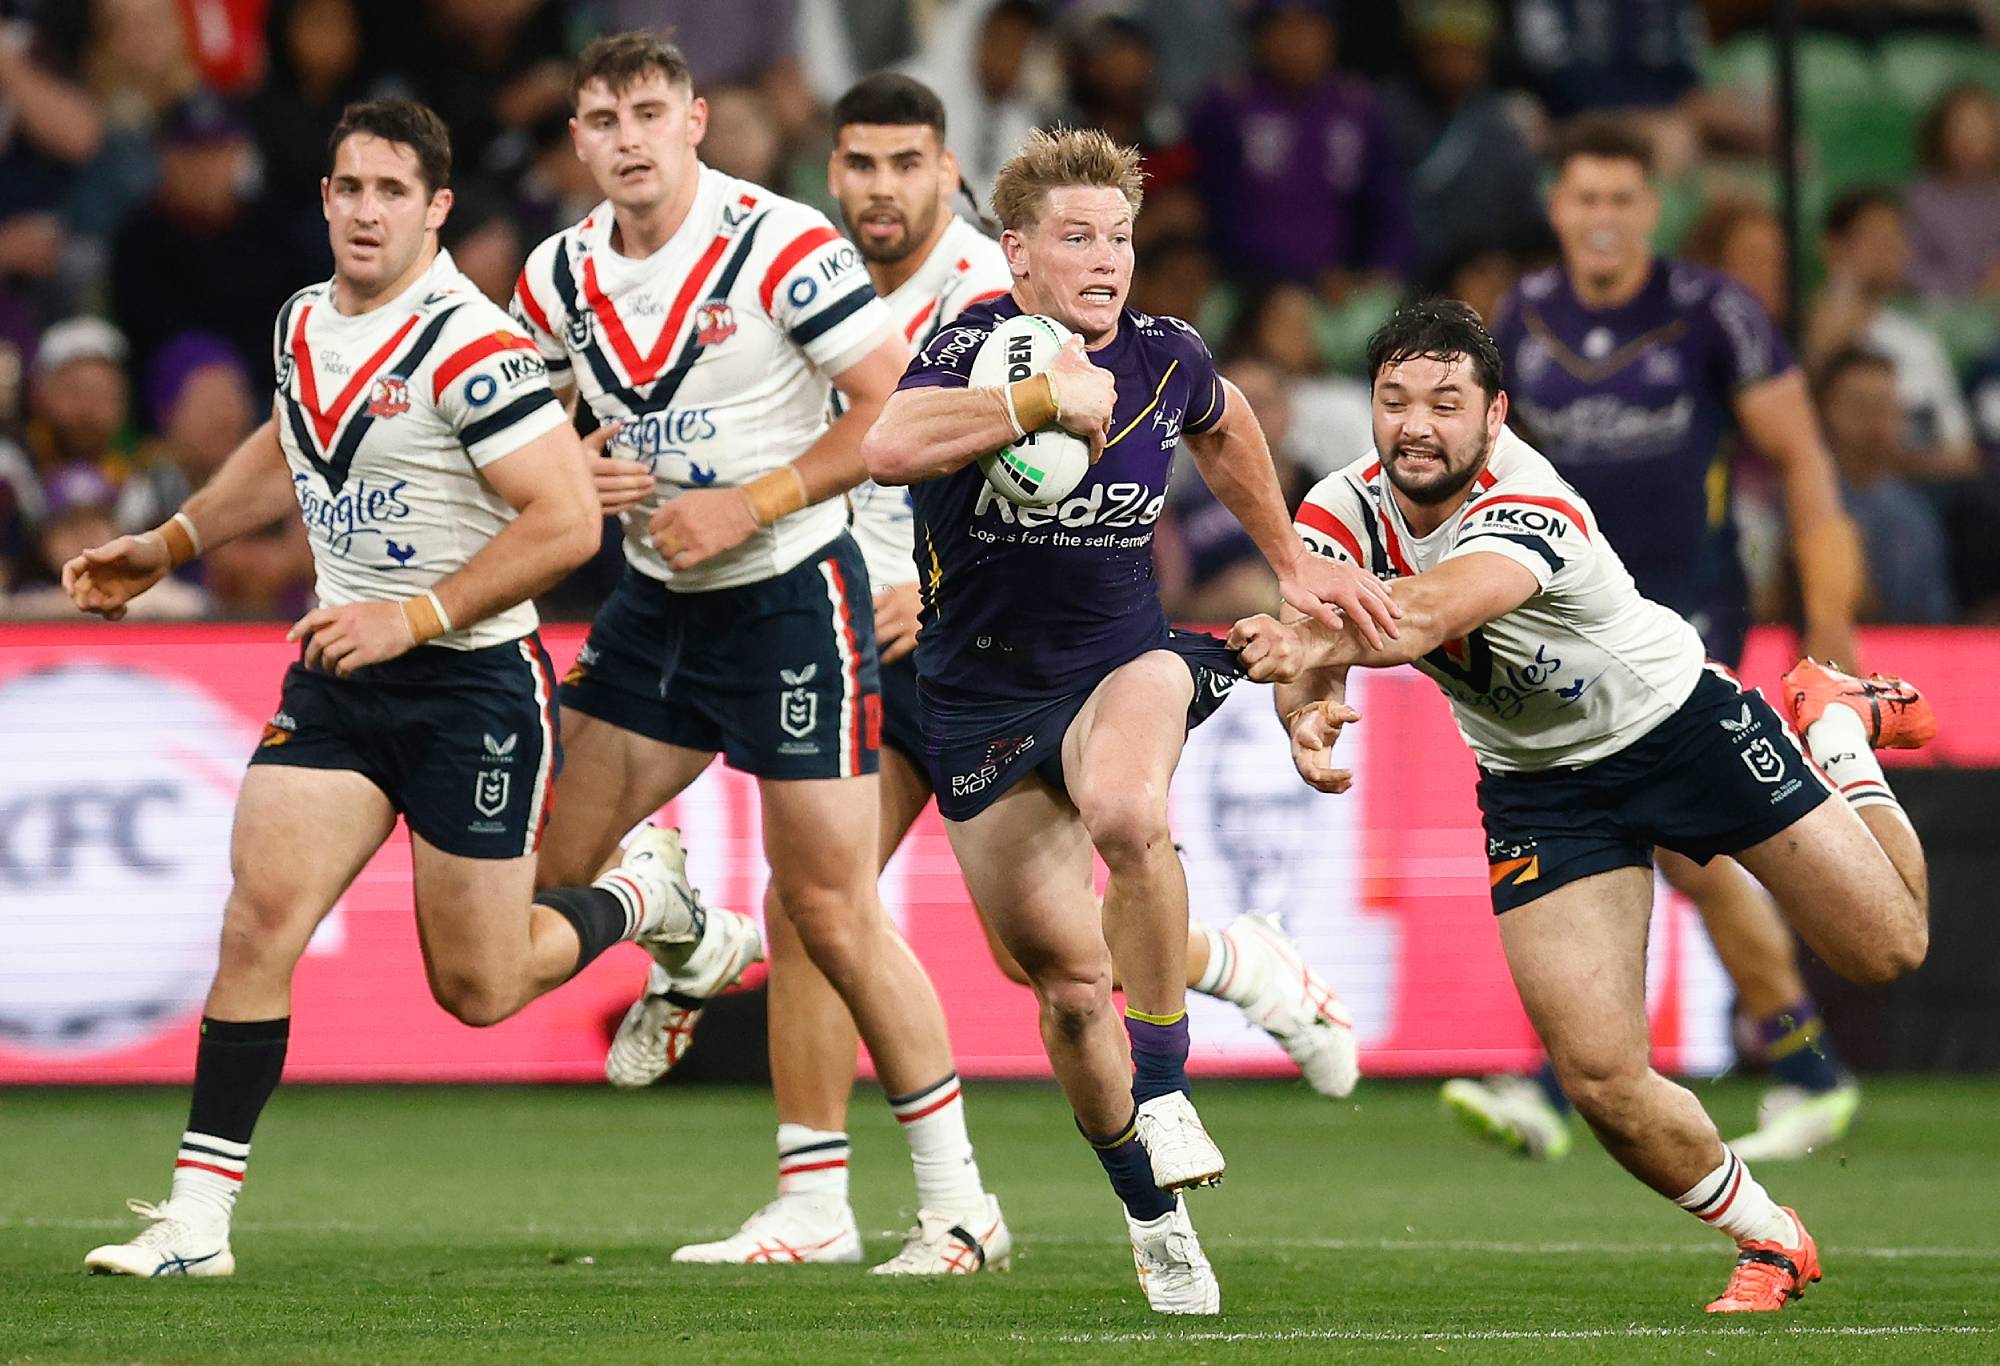 MELBOURNE, AUSTRALIA - SEPTEMBER 15: Harry Grant of the Storm is tackled during the NRL Semi Final match between Melbourne Storm and the Sydney Roosters at AAMI Park on September 15, 2023 in Melbourne, Australia. (Photo by Daniel Pockett/Getty Images)